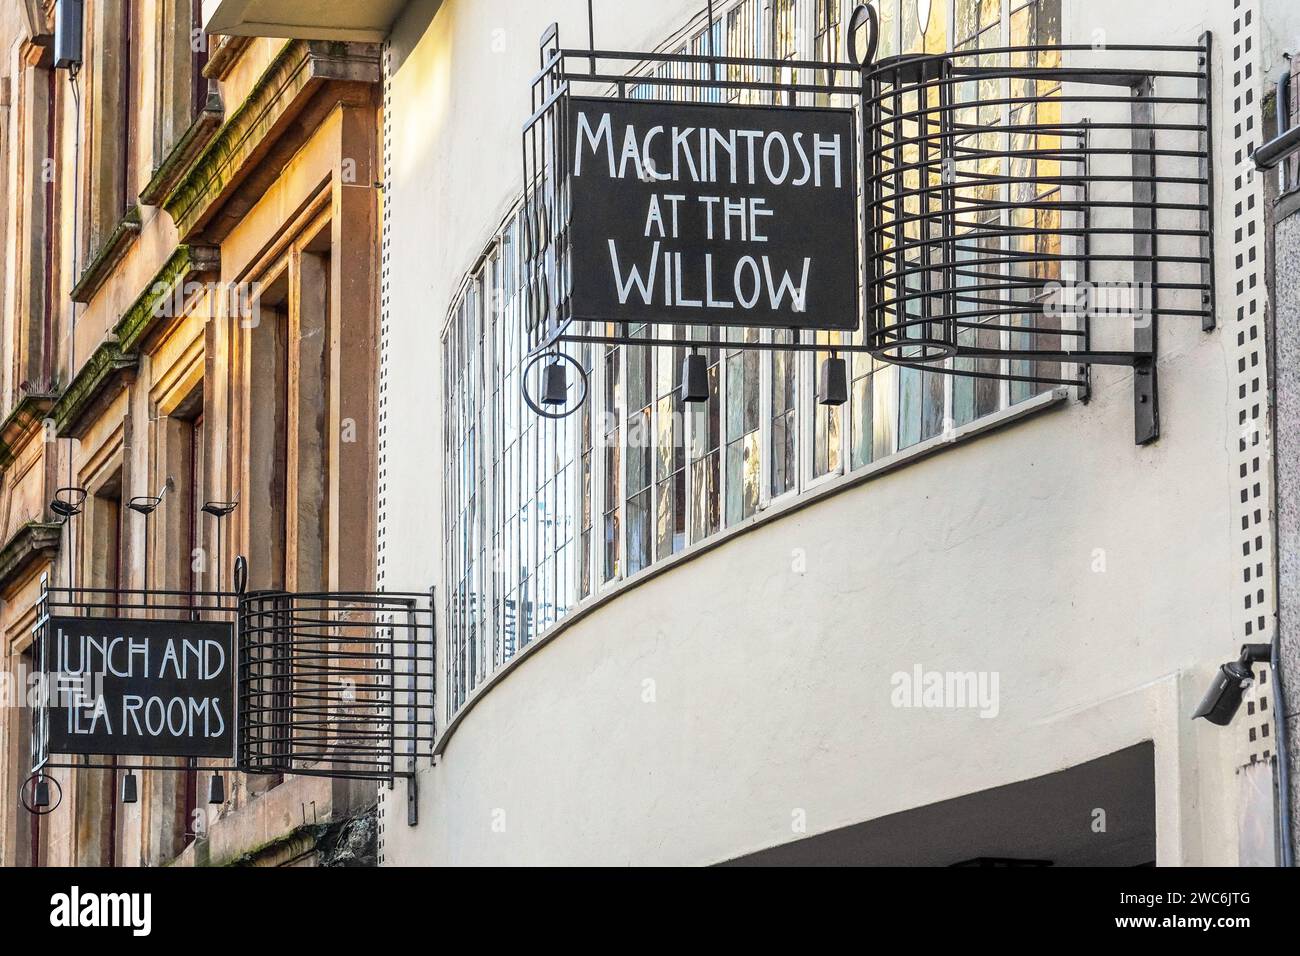 Wall signs outside the 'Macintosh at the Willow' tearooms, Sauchiehall Street, Glasgow, Scotland, UK. Stock Photo